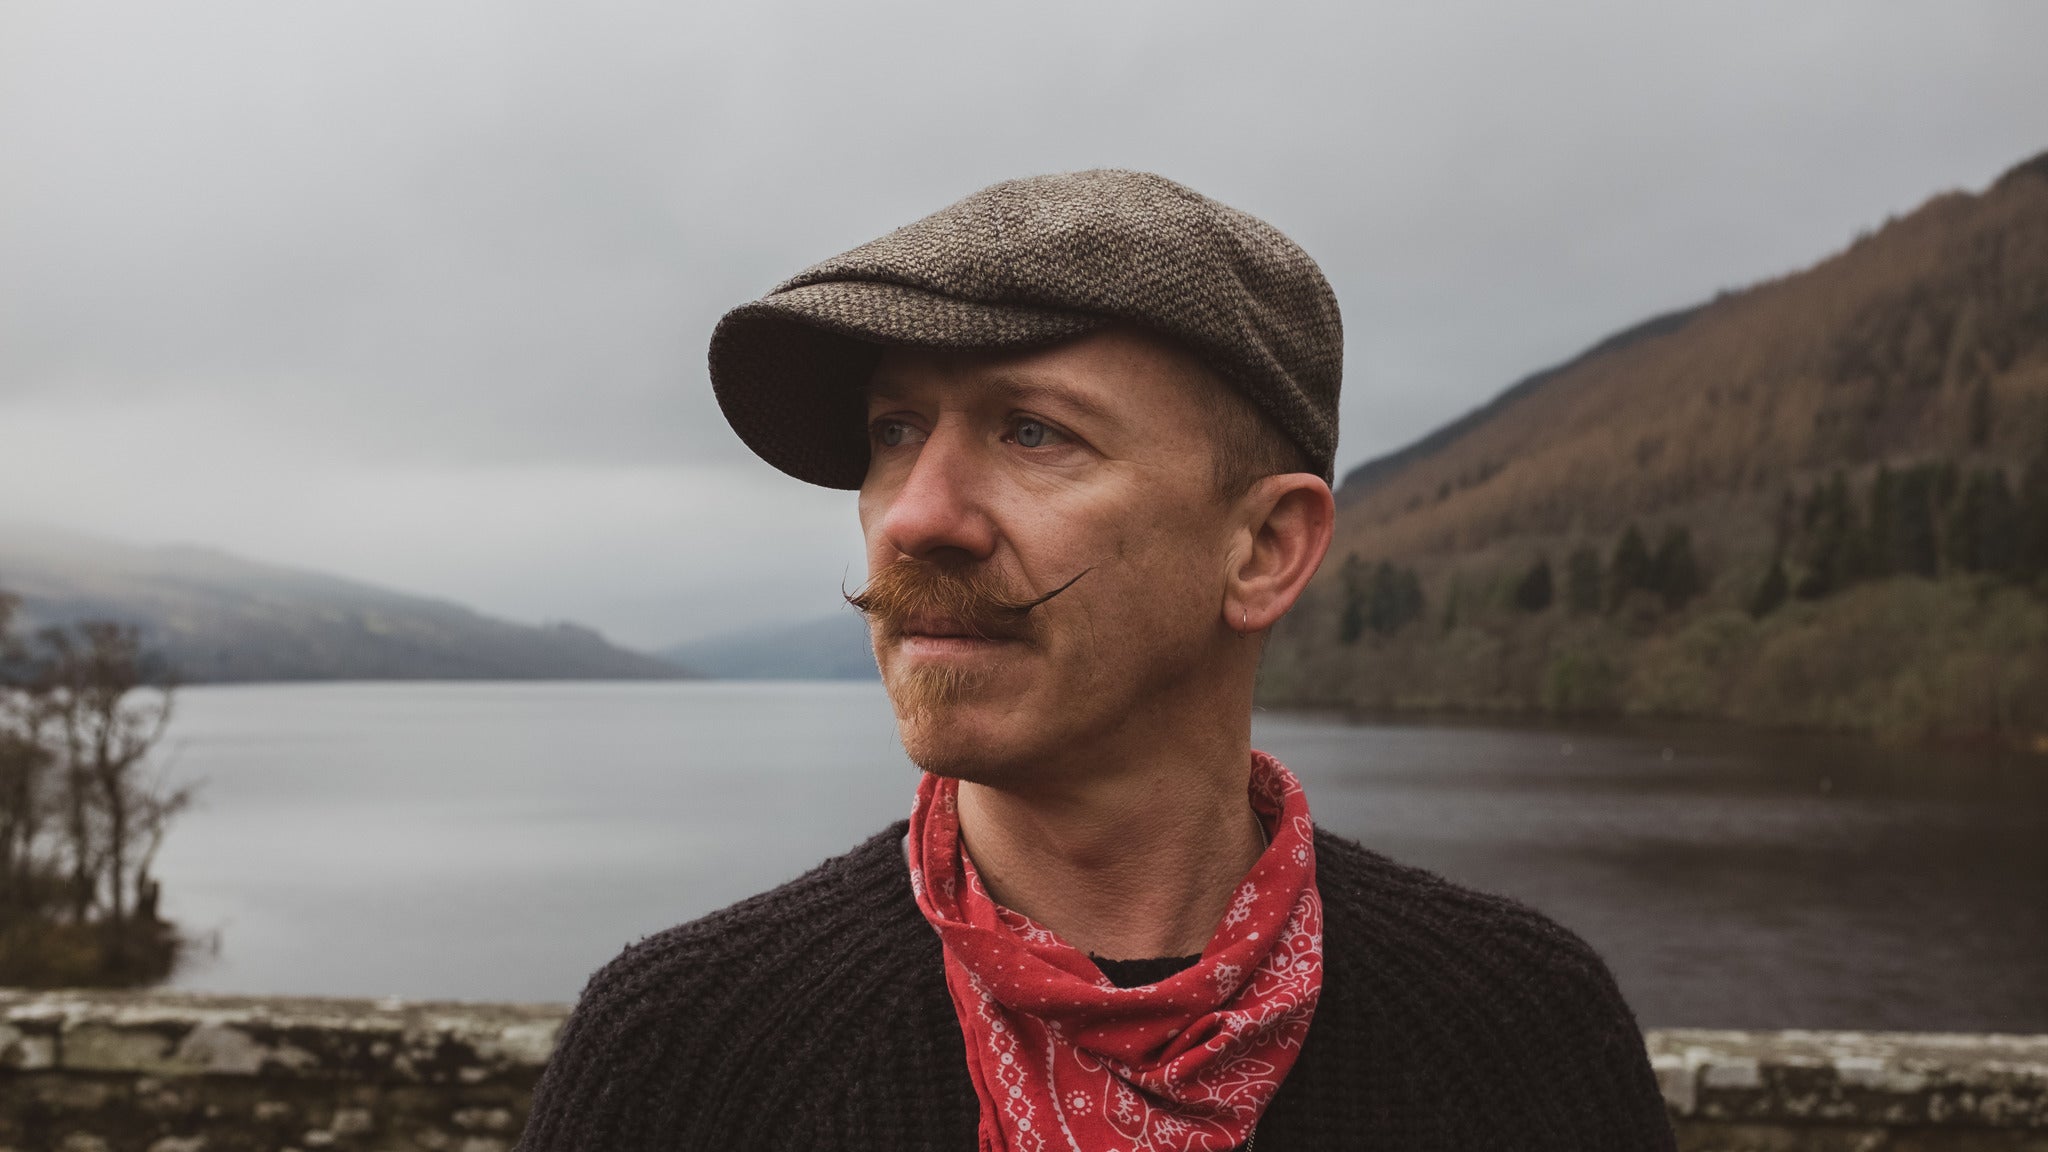 Image used with permission from Ticketmaster | Foy Vance tickets